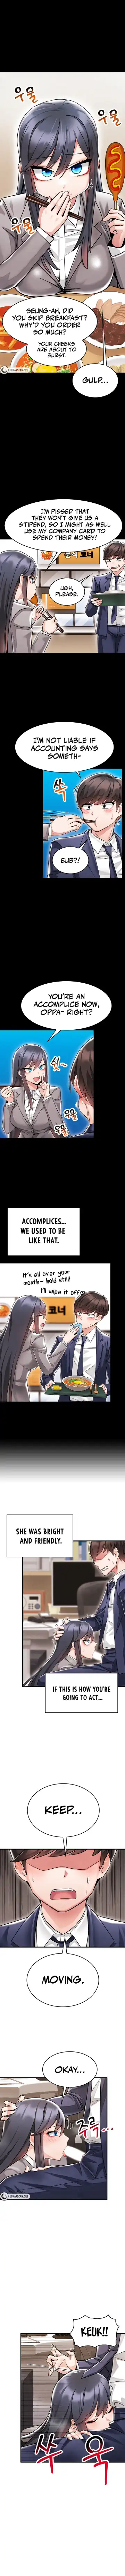 [Gaehoju] Relationship Reverse Button: Let's Make Her Submissive Fhentai.net - Page 14